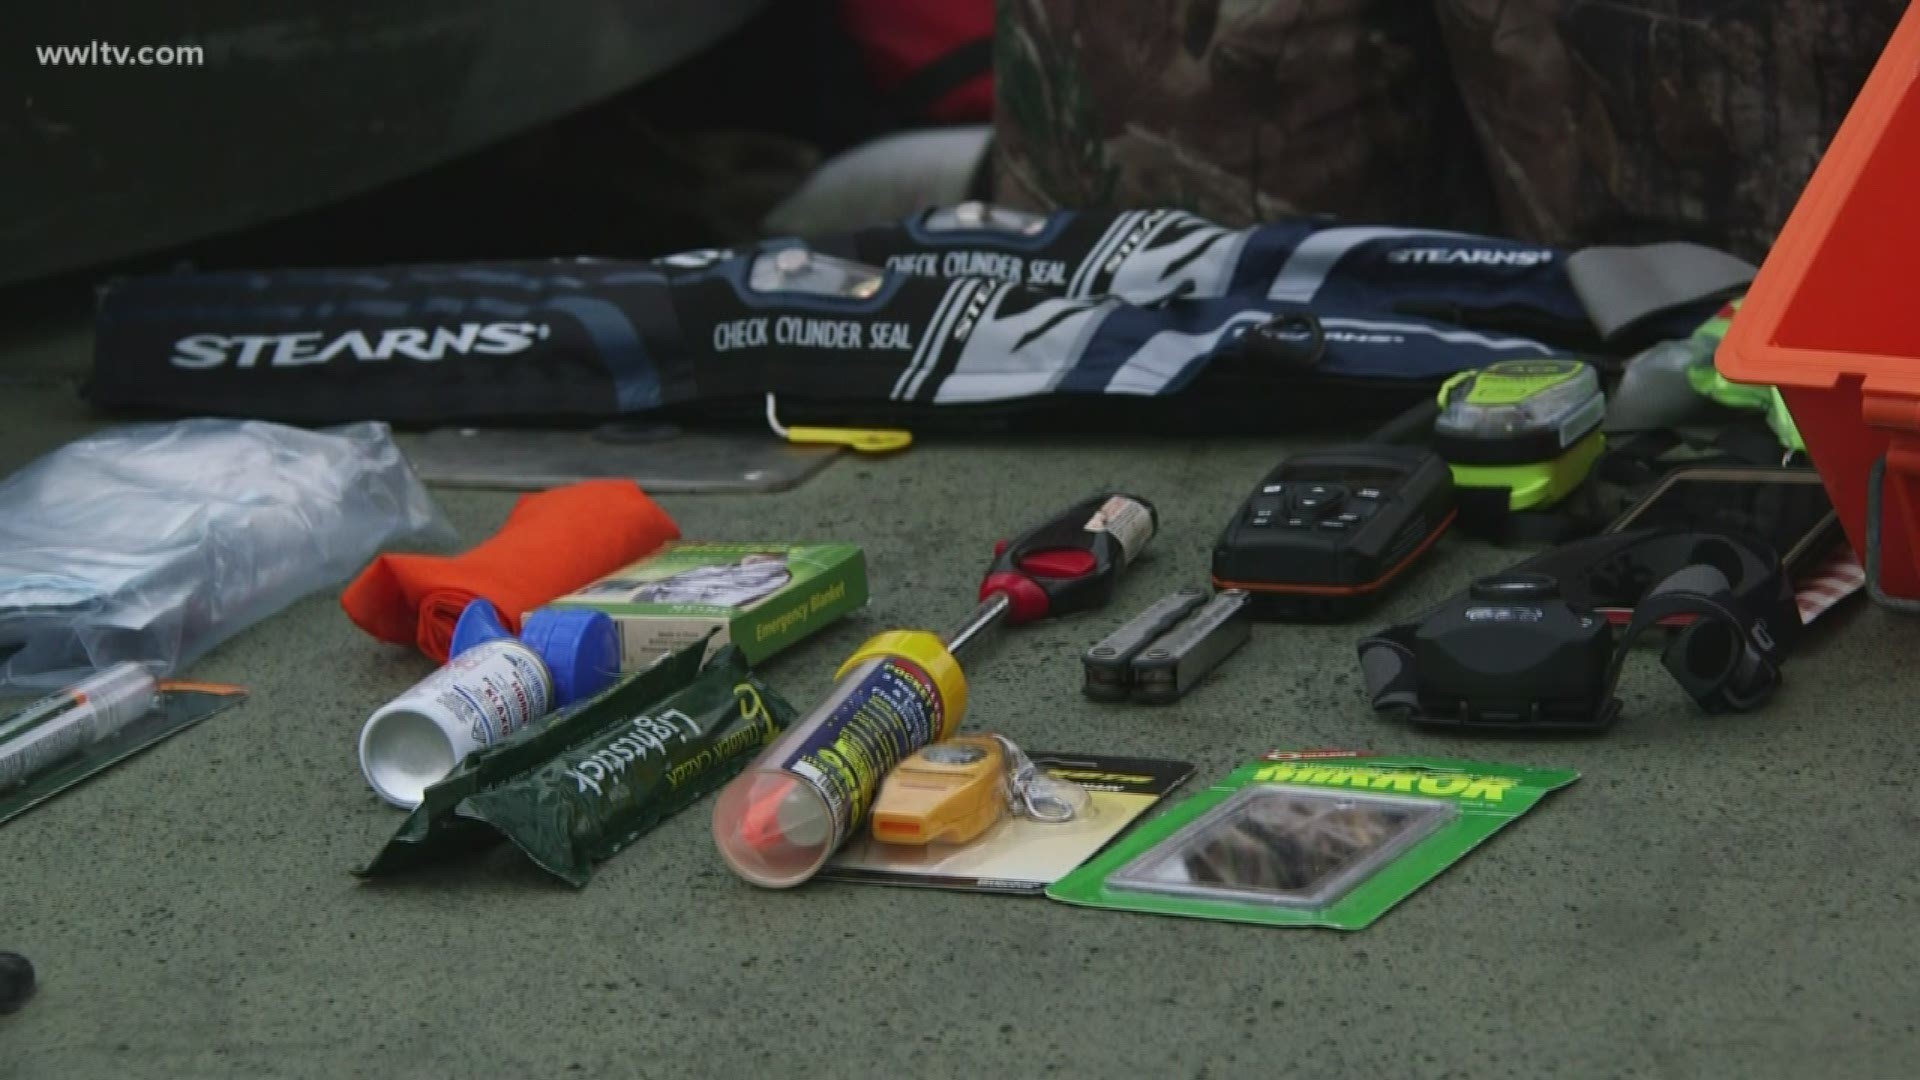 Don Debuc and the crew has some safety tips for Duck Hunters.